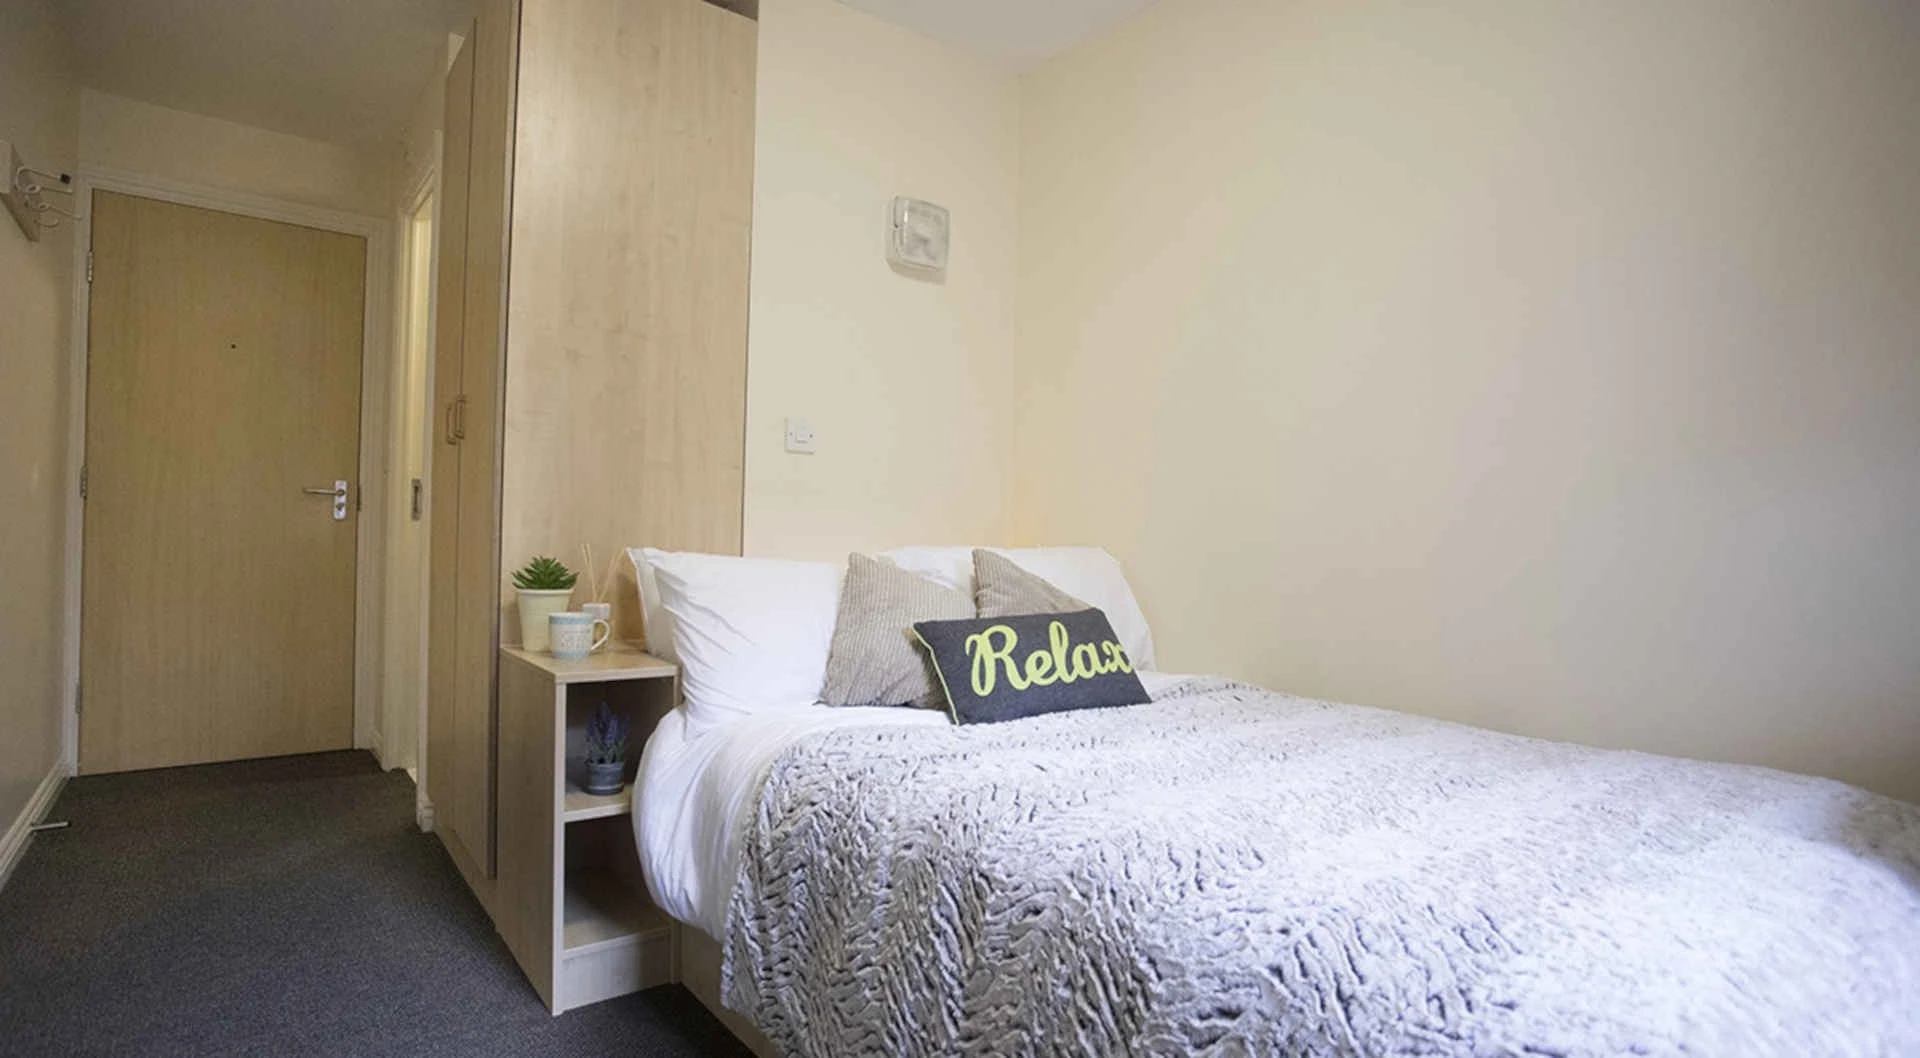 Room for rent in a shared flat in Preston